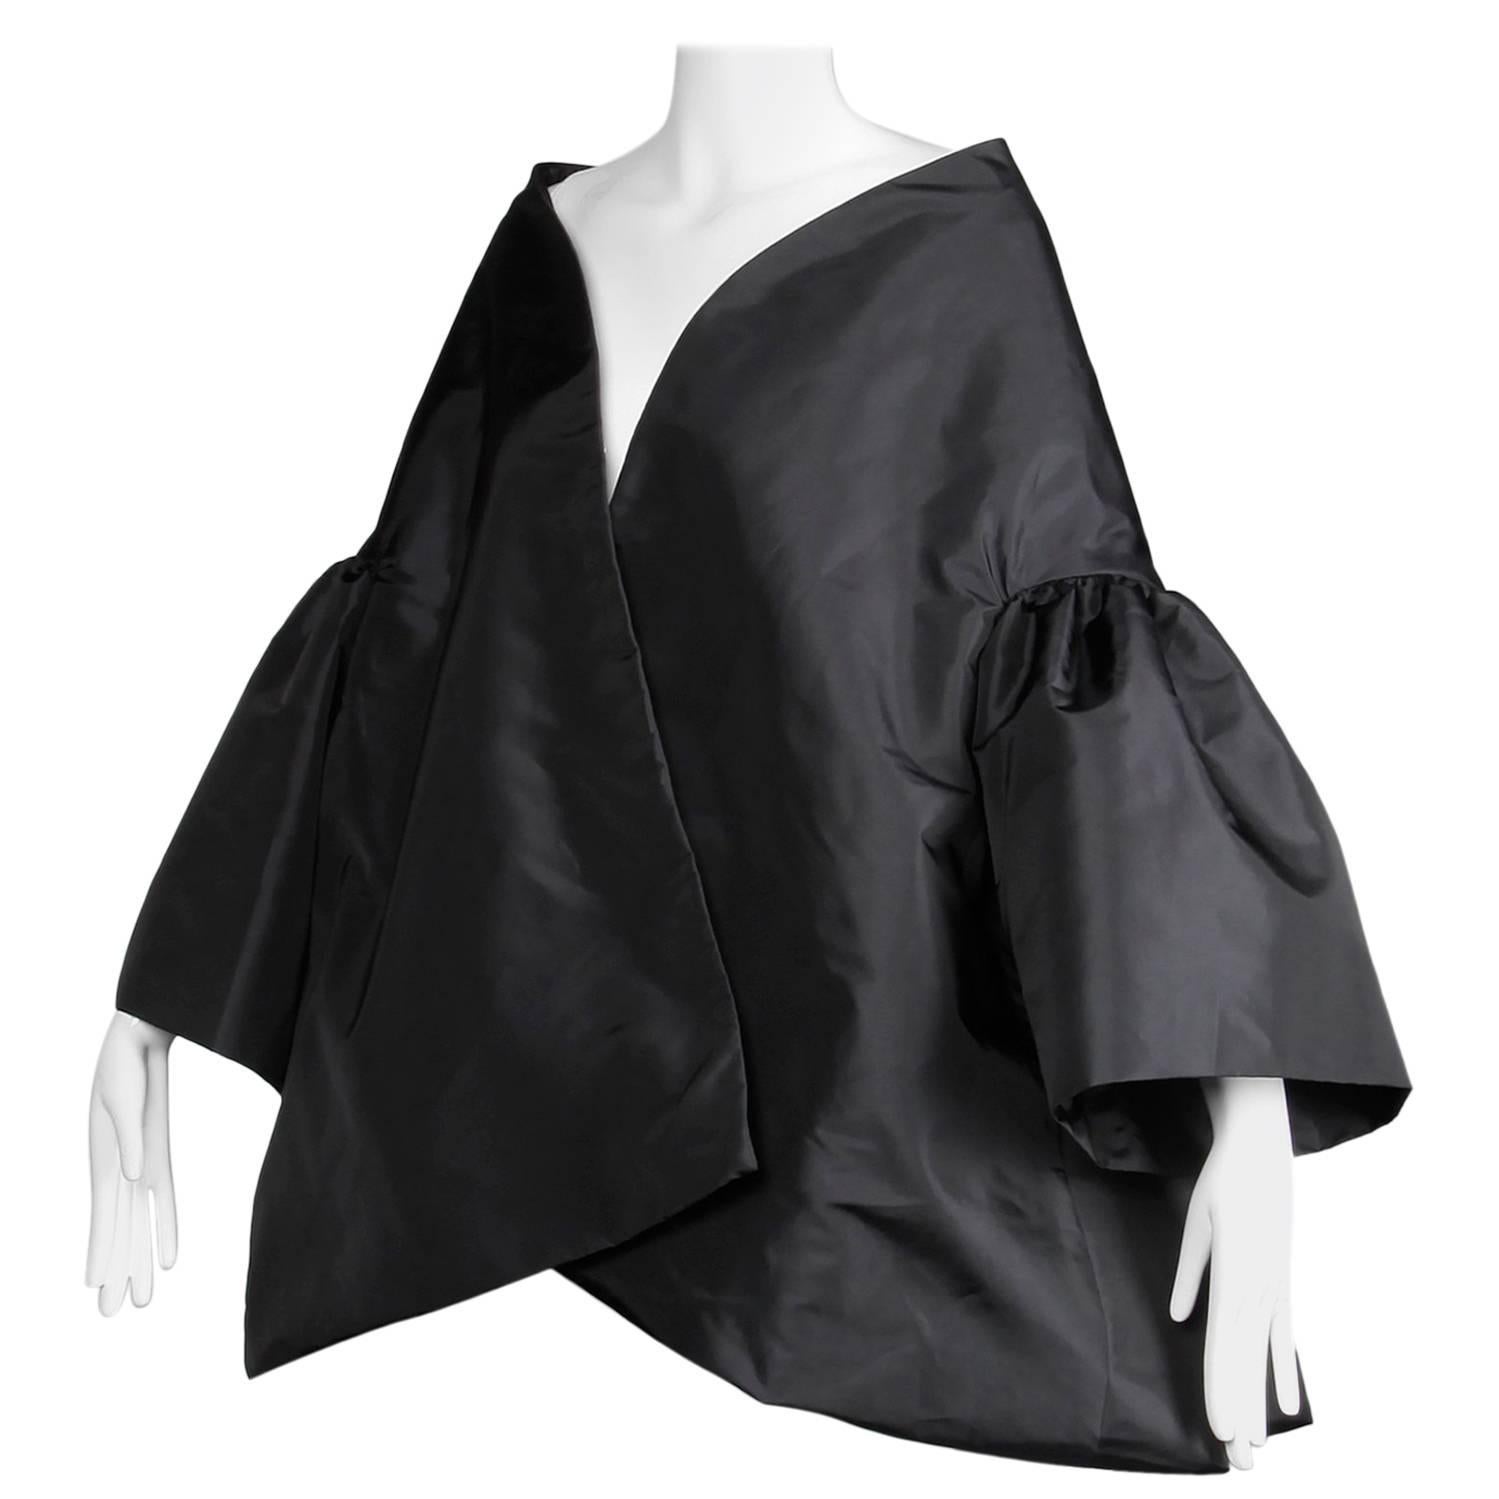 Amazing Victor Costa Black Taffeta Opera Cape Coat or Jacket with Bell Sleeves